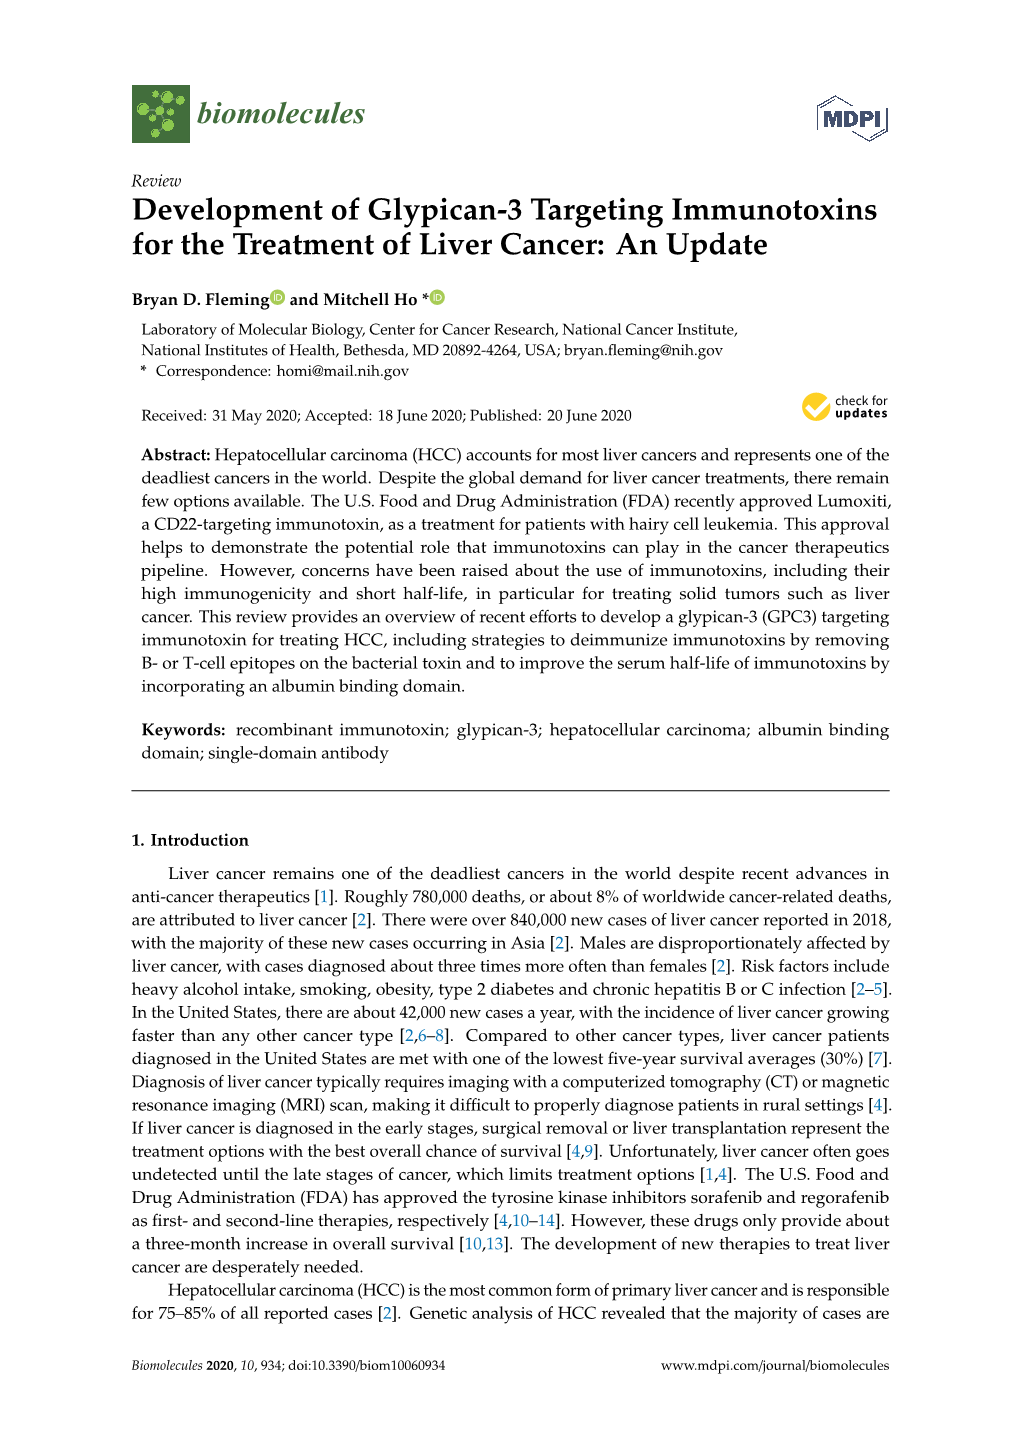 Development of Glypican-3 Targeting Immunotoxins for the Treatment of Liver Cancer: an Update